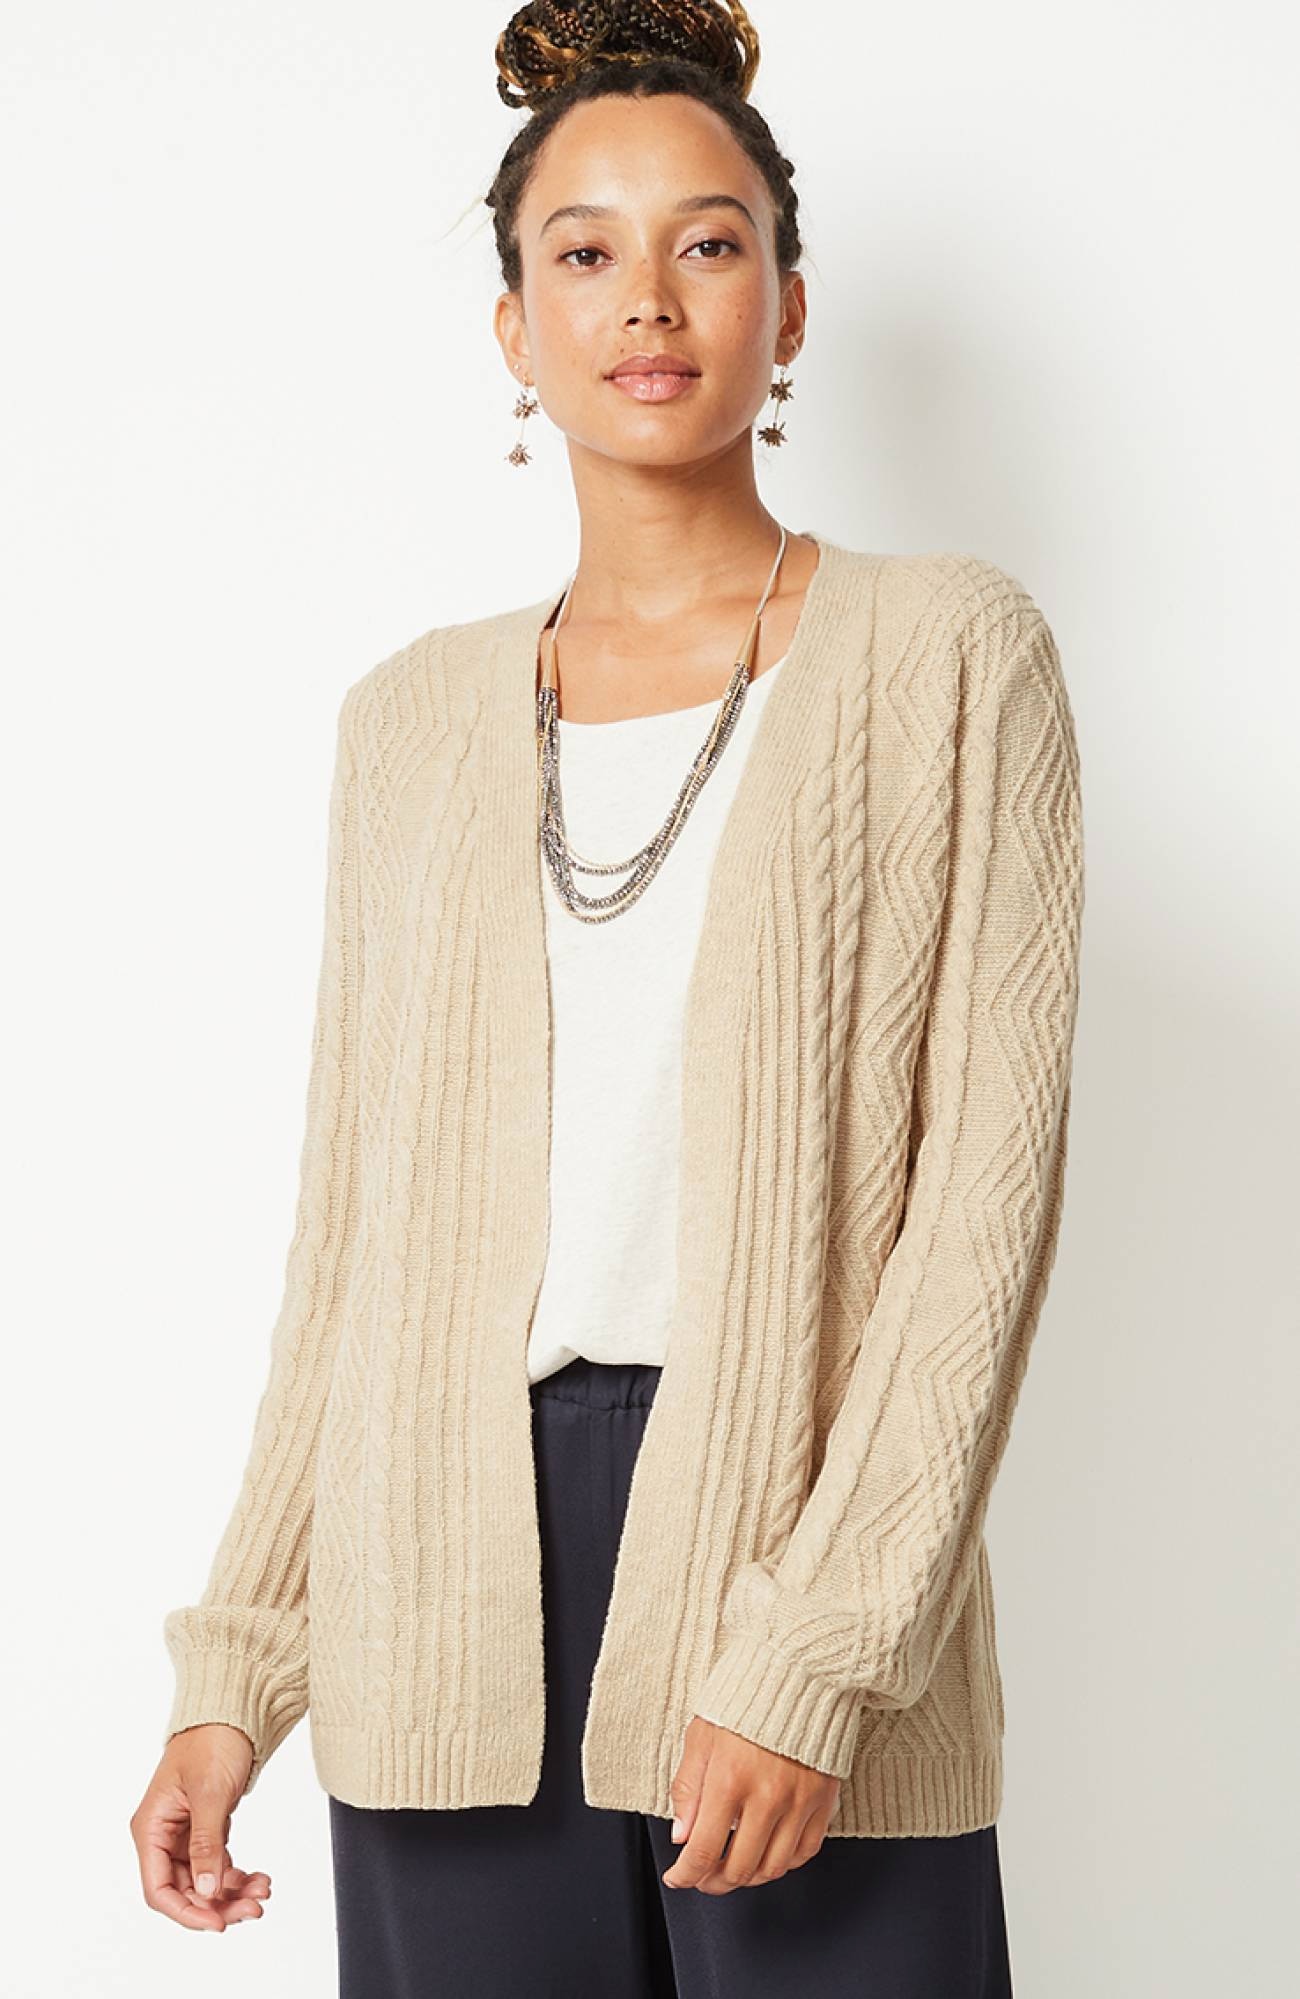 Cabled Wrap Cardi